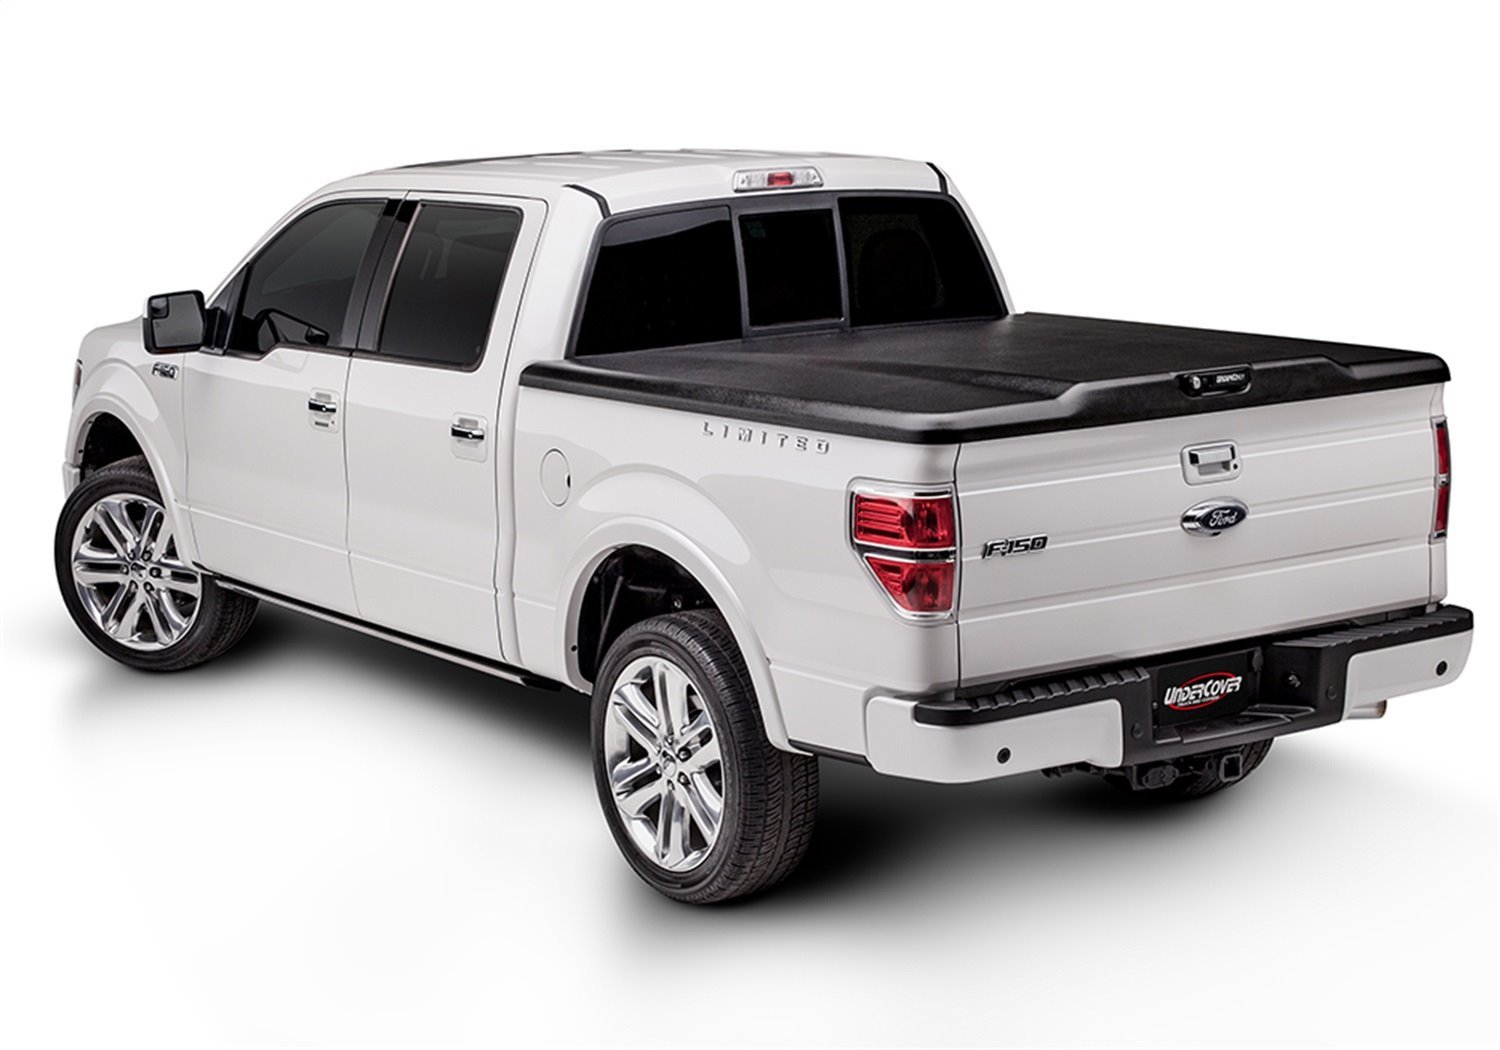 UC1258 Elite Hard Non-Folding Cover, Fits Select Chevy Silverado 5'9" Bed EXT/Crew w/ Multi-Tailgate, Black Textured